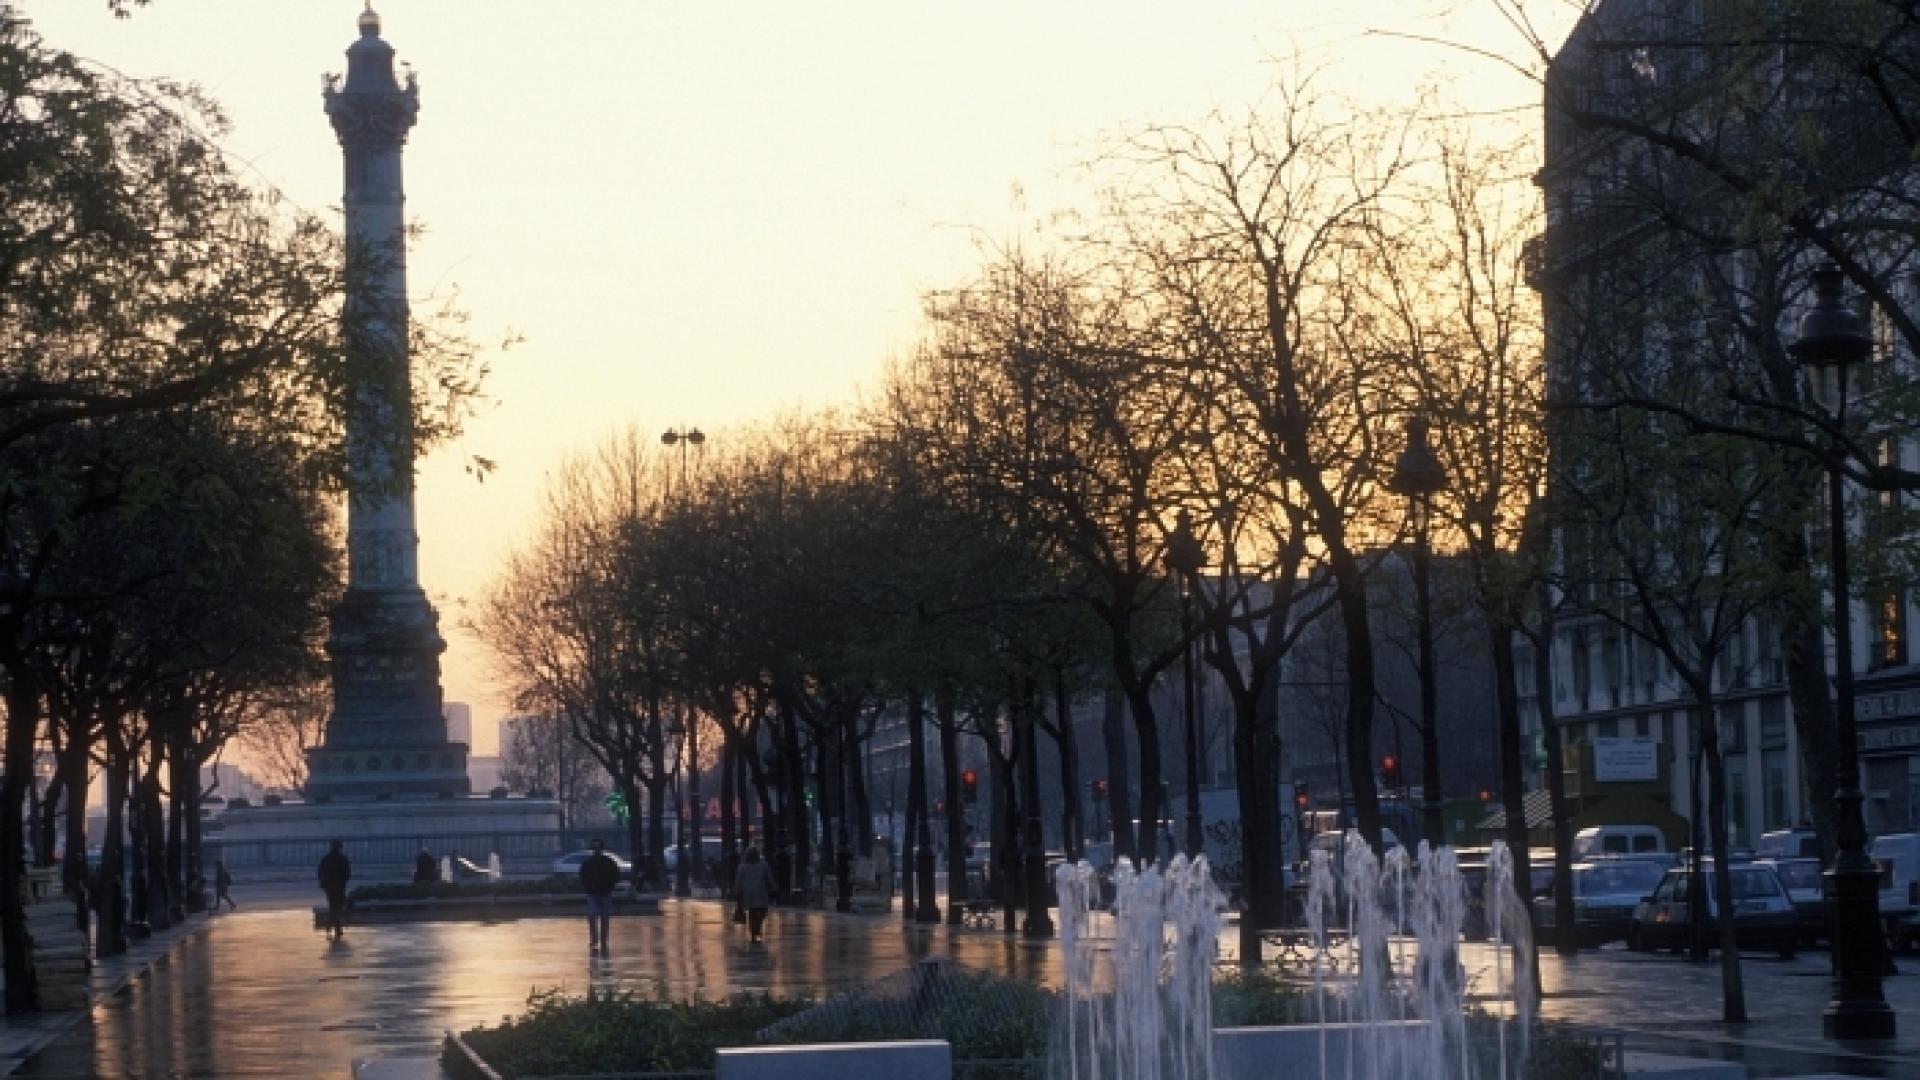 The attractions of the Paris Bastille district